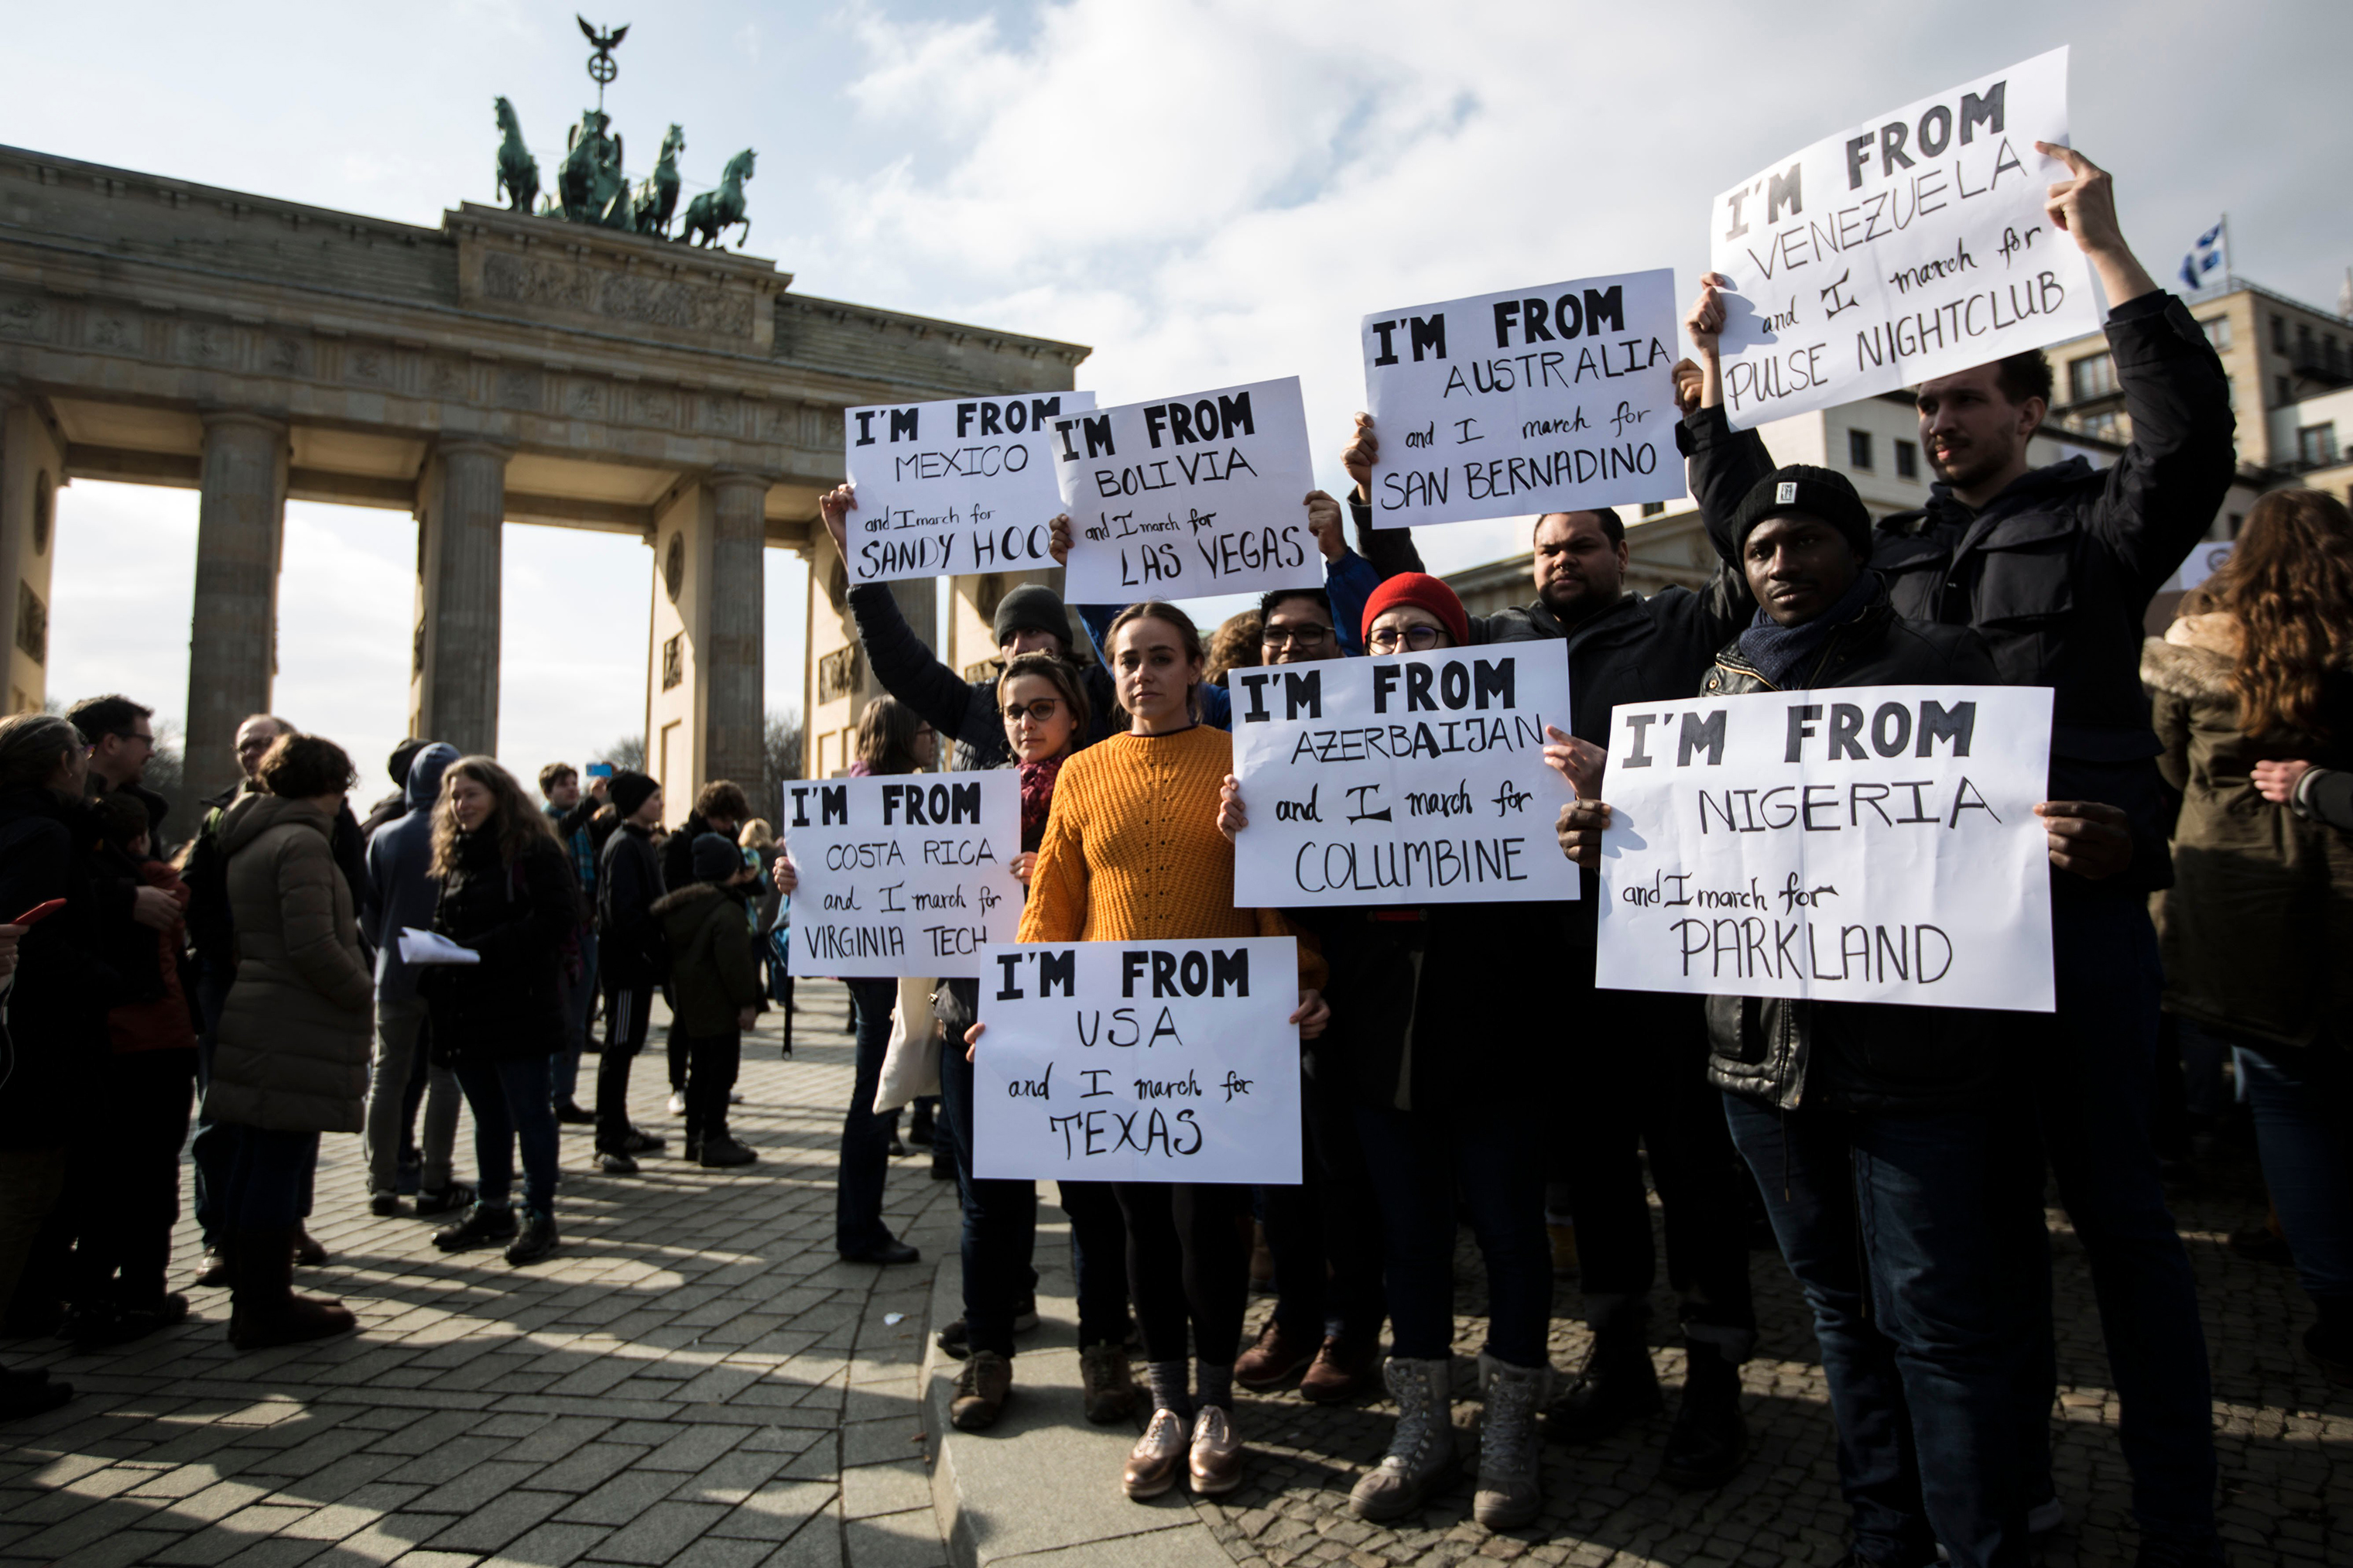 About 500 people gathered at Brandenburg Gate in the German capital to honor the victims of the Parkland massacre and call for stronger gun control in the United States. (Omer Messinger—EPA-EFE/Shutterstock)